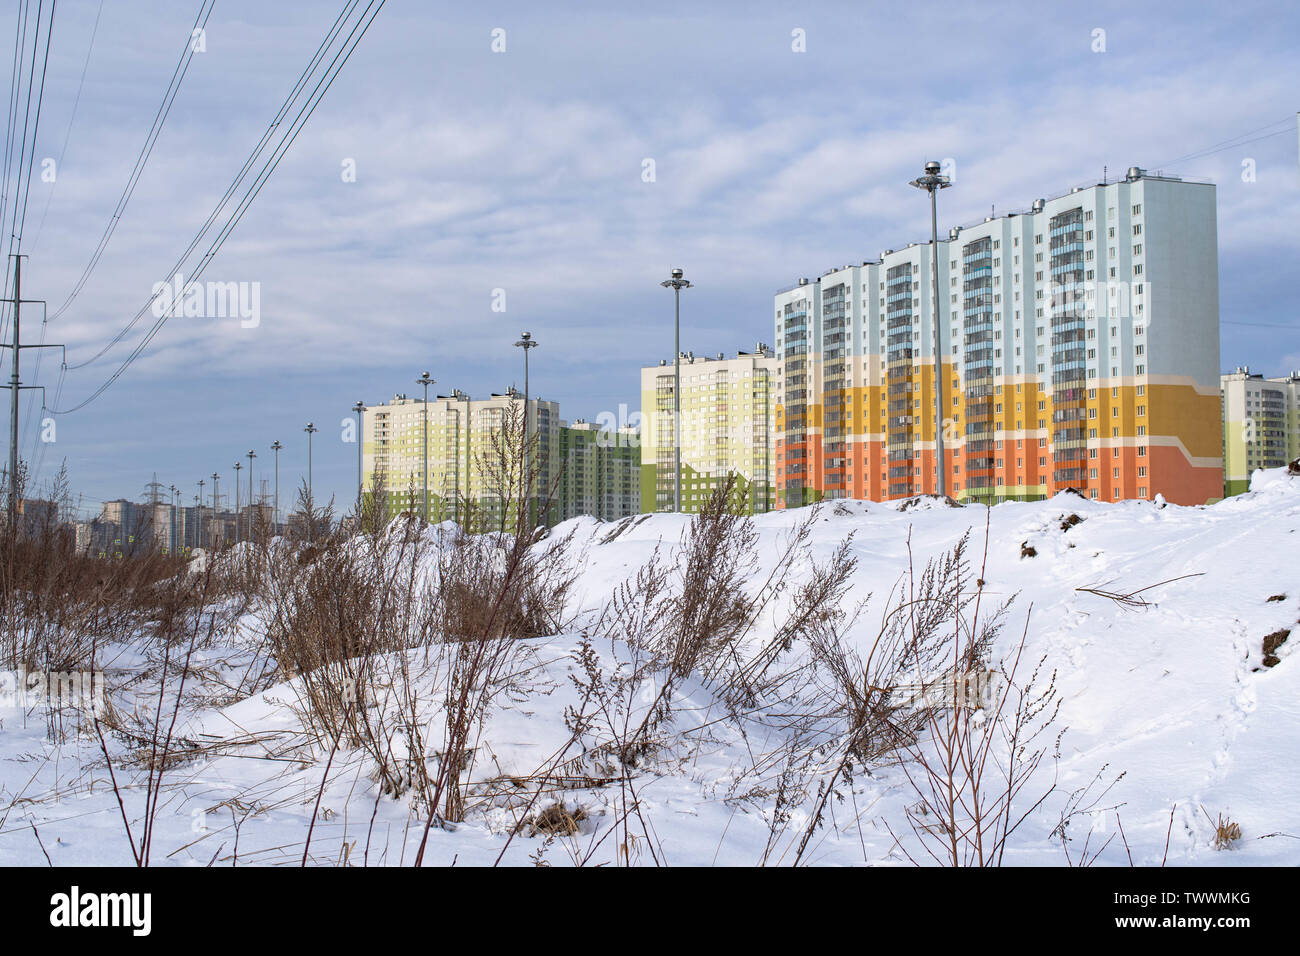 residential high-rise buildings on the background of dirty snowy hills Stock Photo